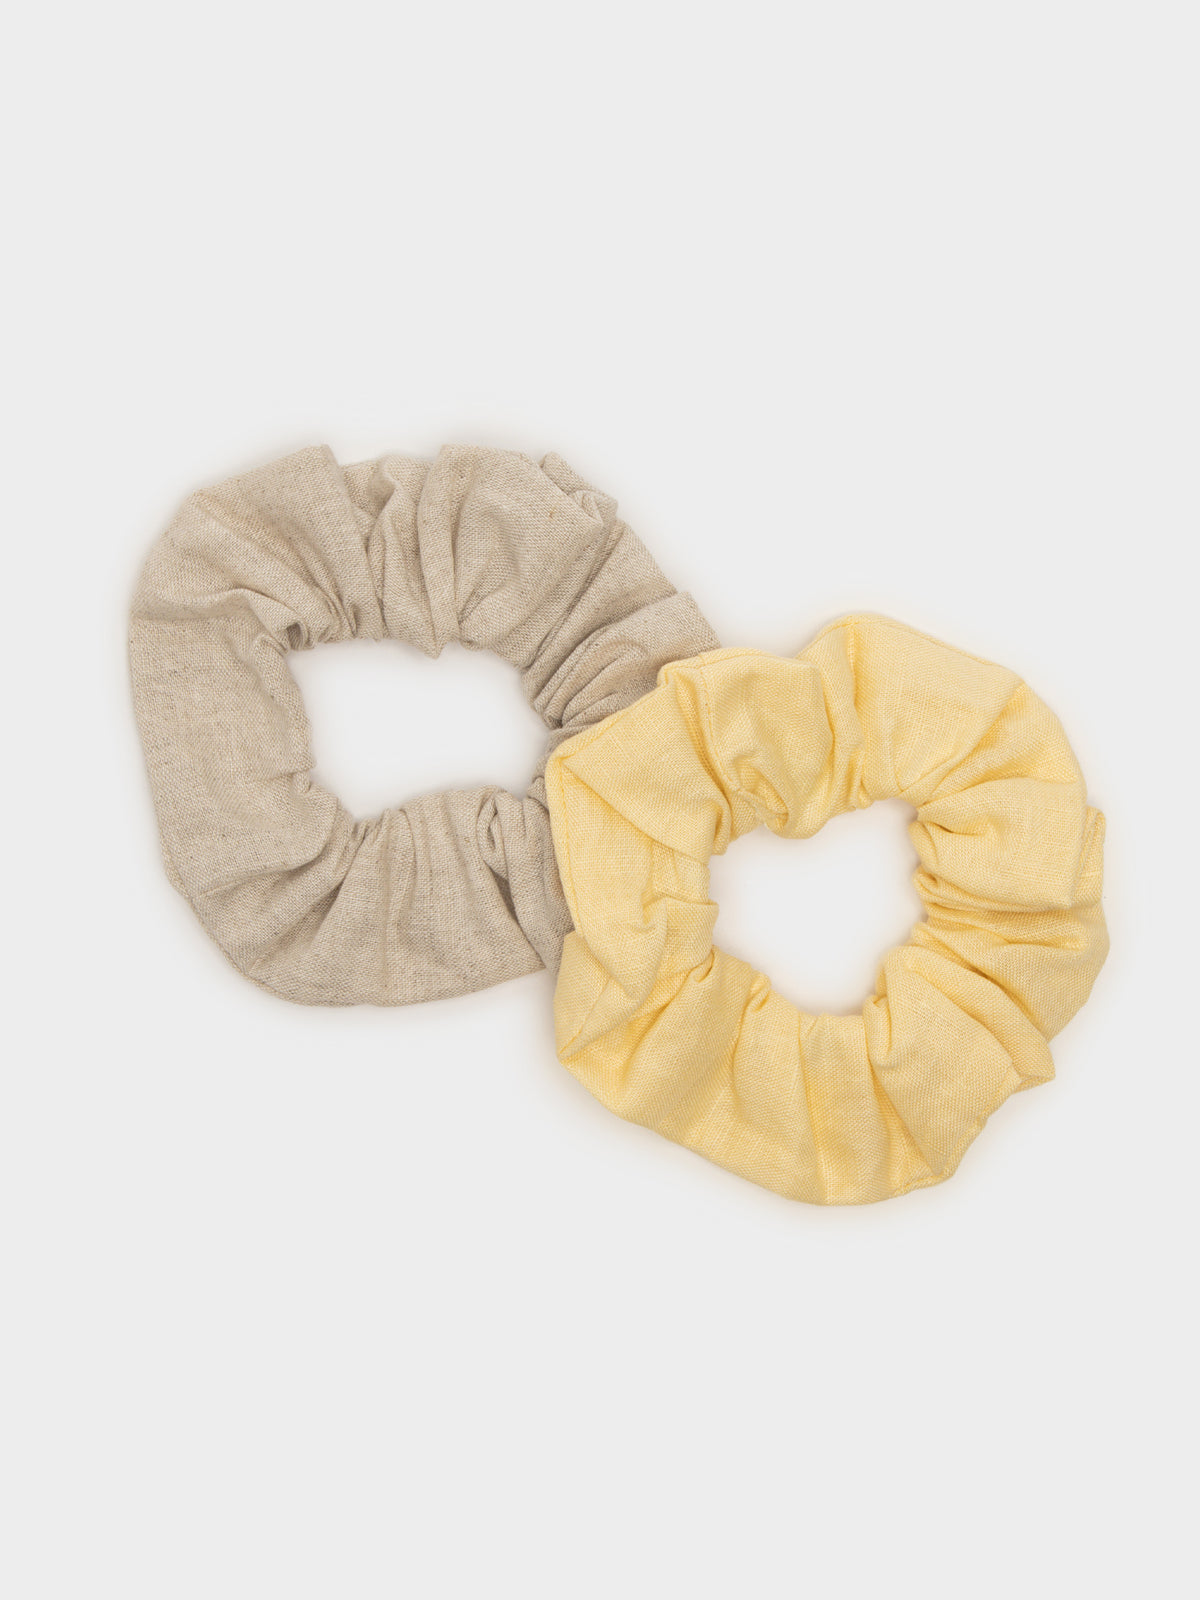 2 Scrunchies in Yellow &amp; Natural